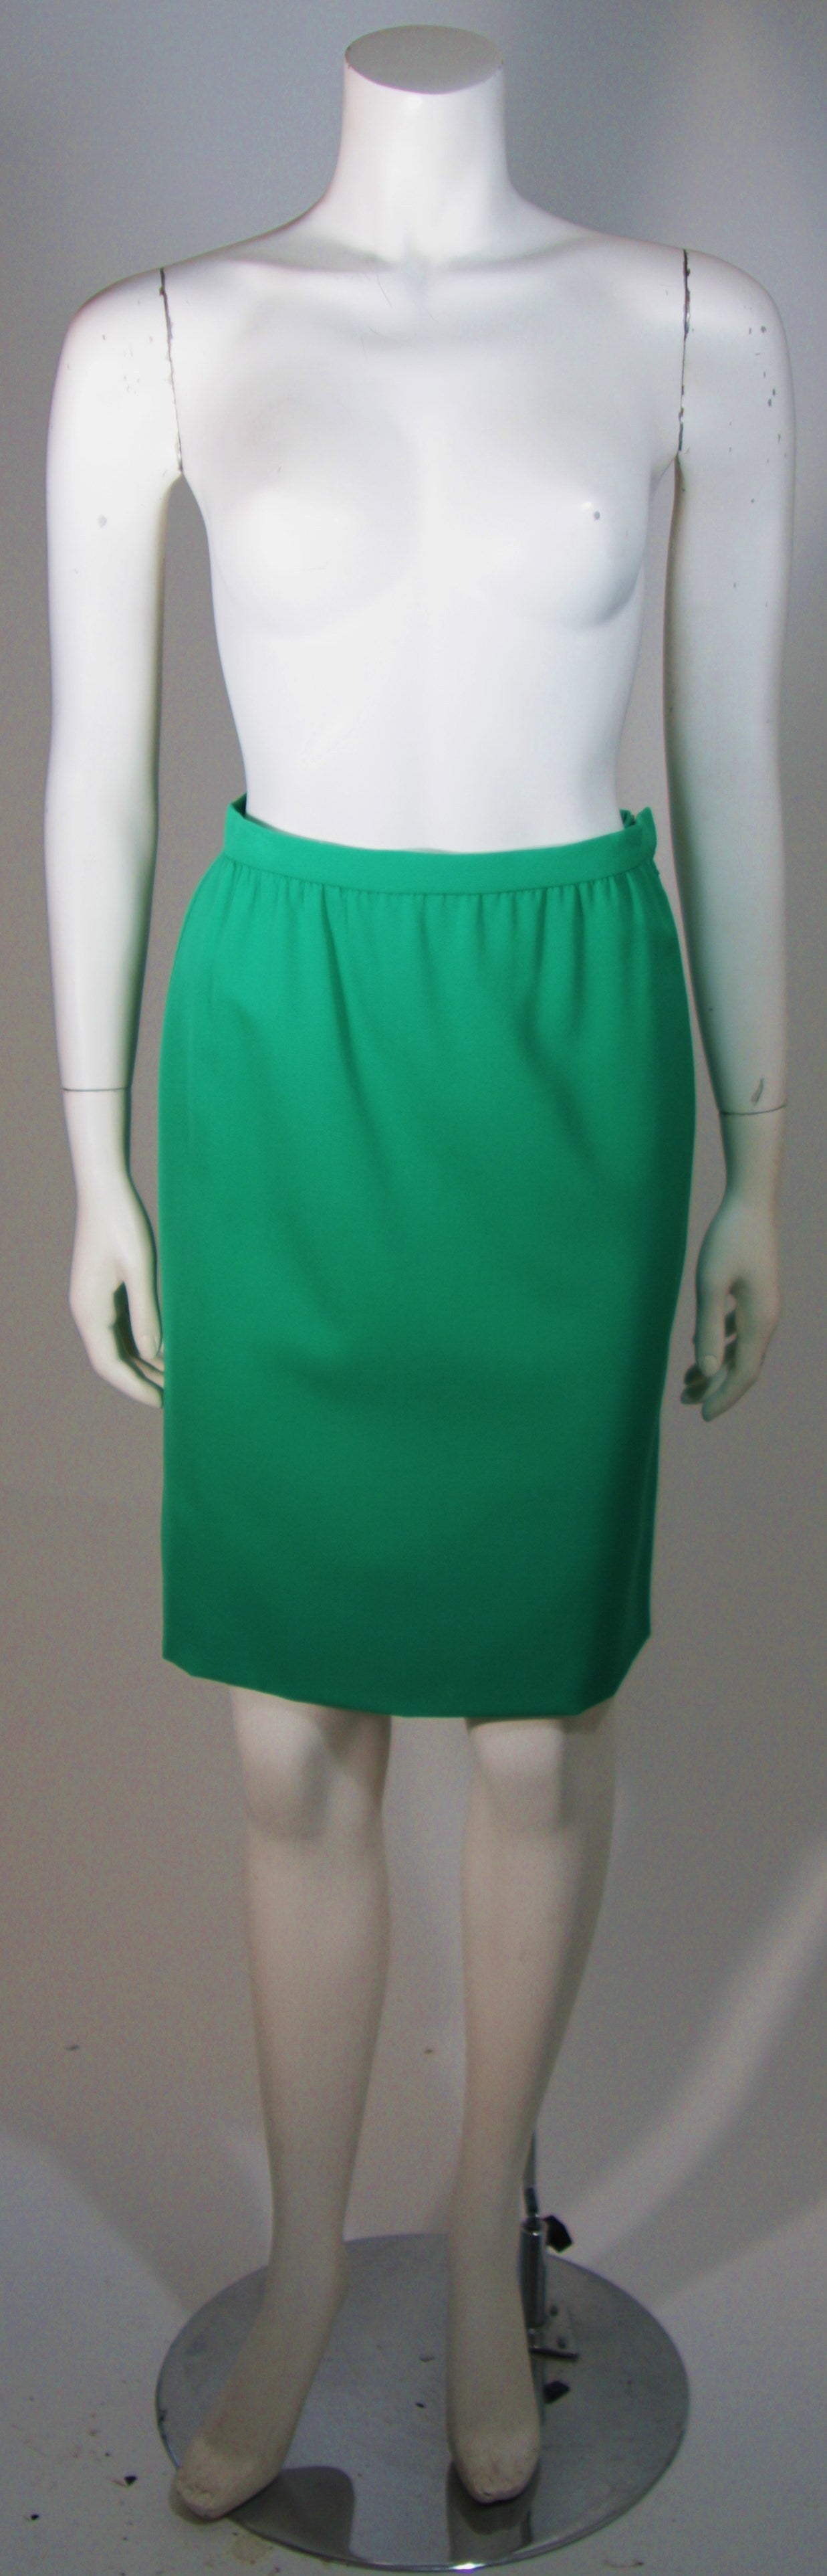 Galanos Couture Kelly Green Skirt Suit Size 2 4 3